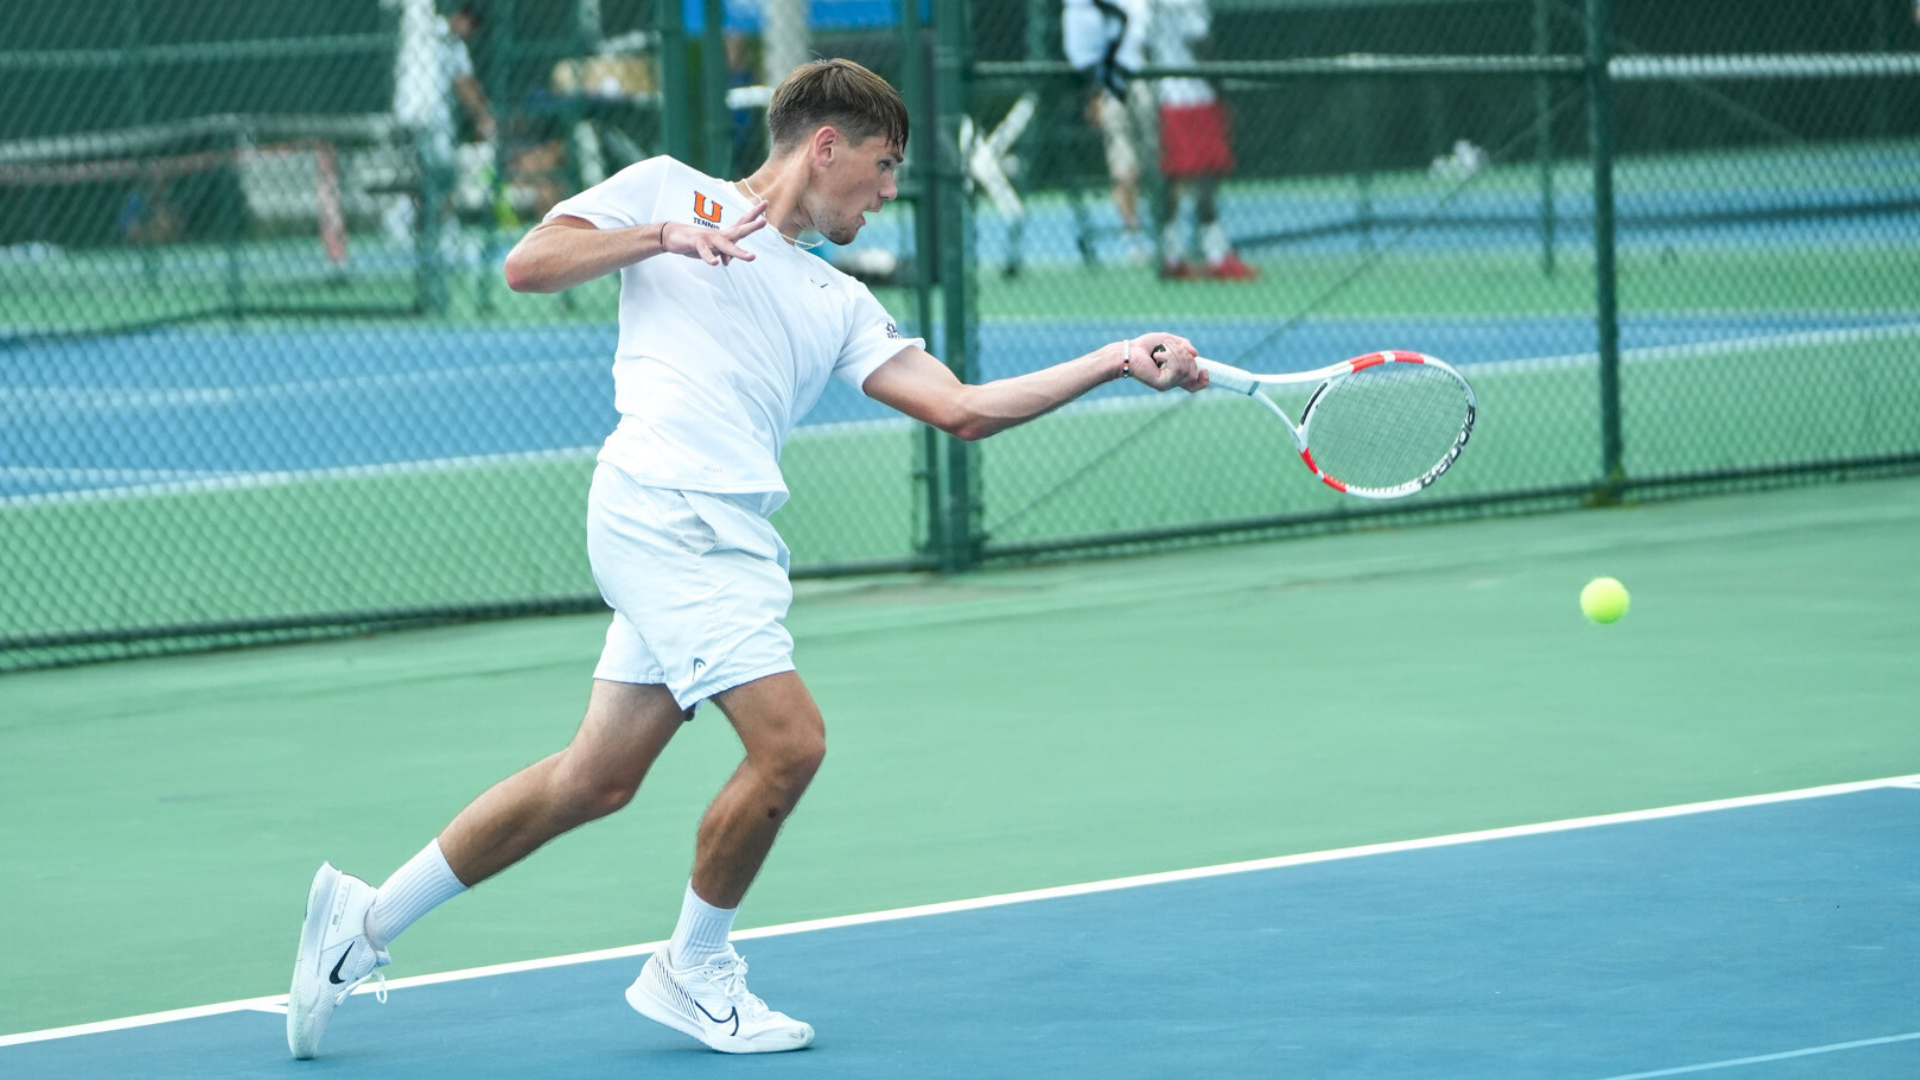 The Bulldogs fall in First Round of NAIA Men’s Tennis National Championship